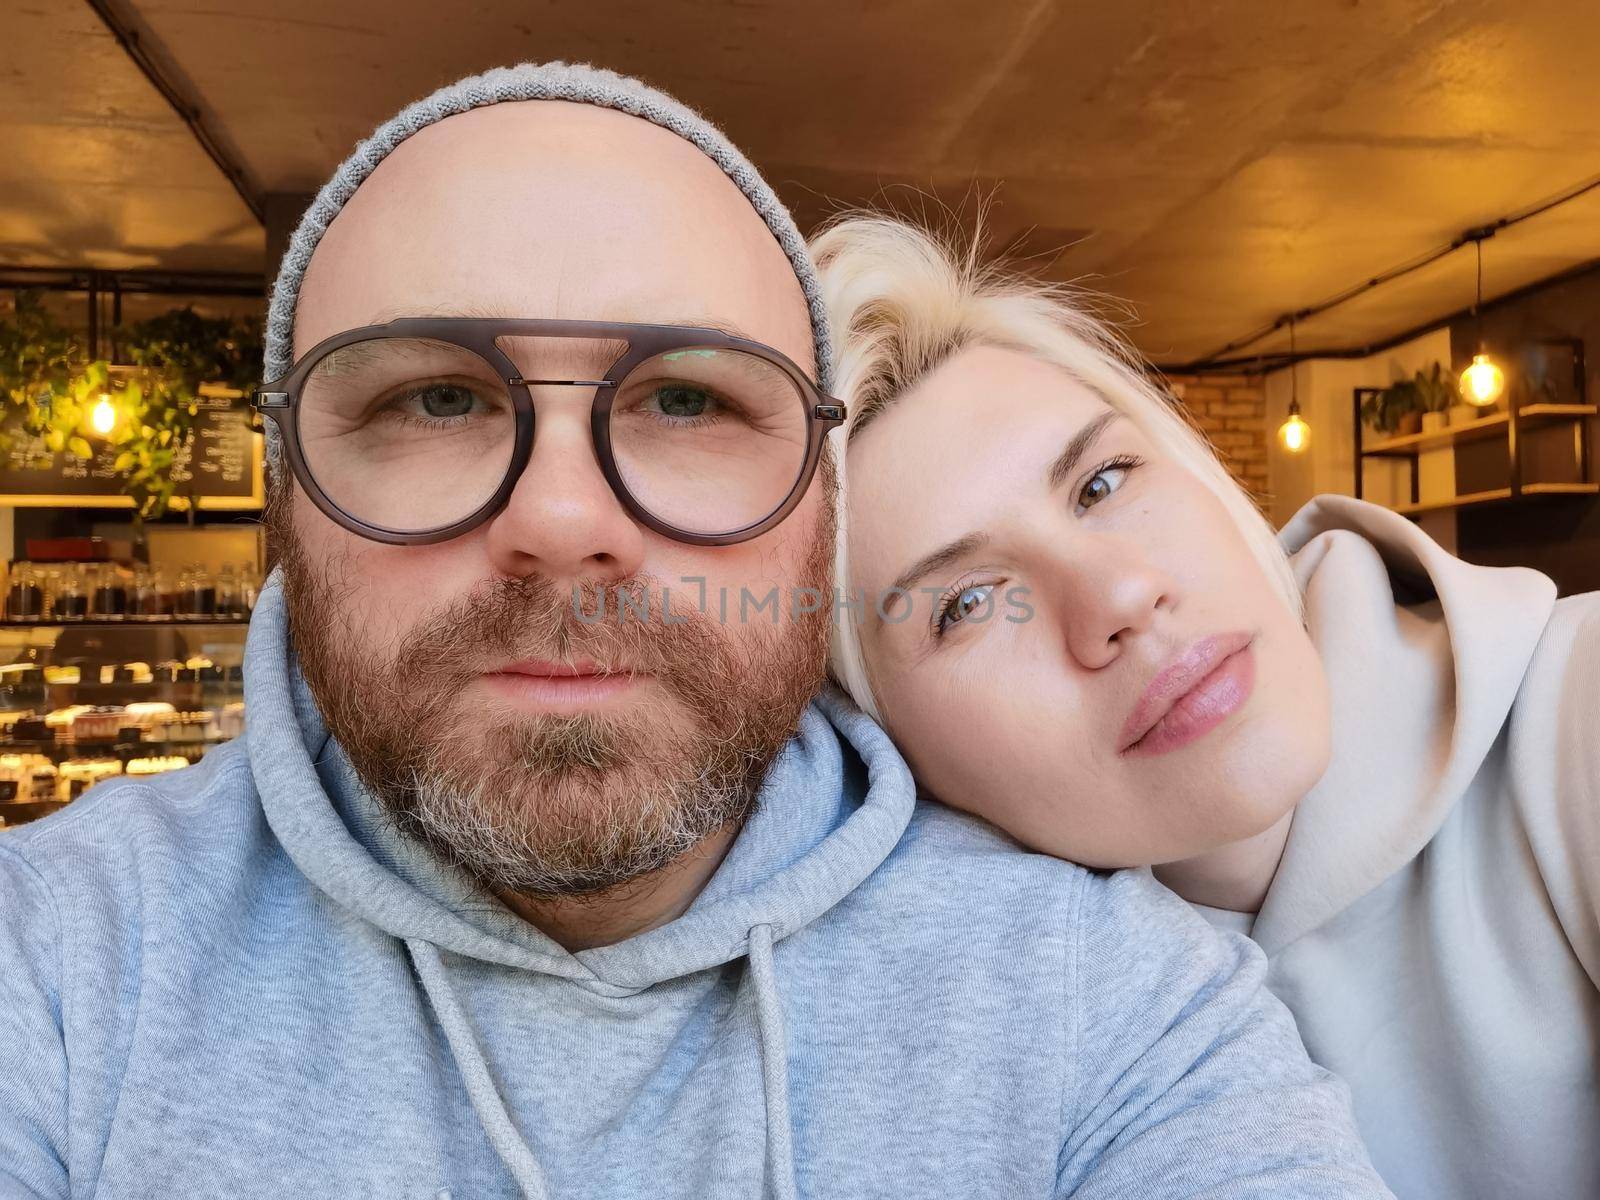 Romantic couple taking selfie in cafe. Young attractive man in eyeglasses with pretty blond woman. Restaurant or cafe